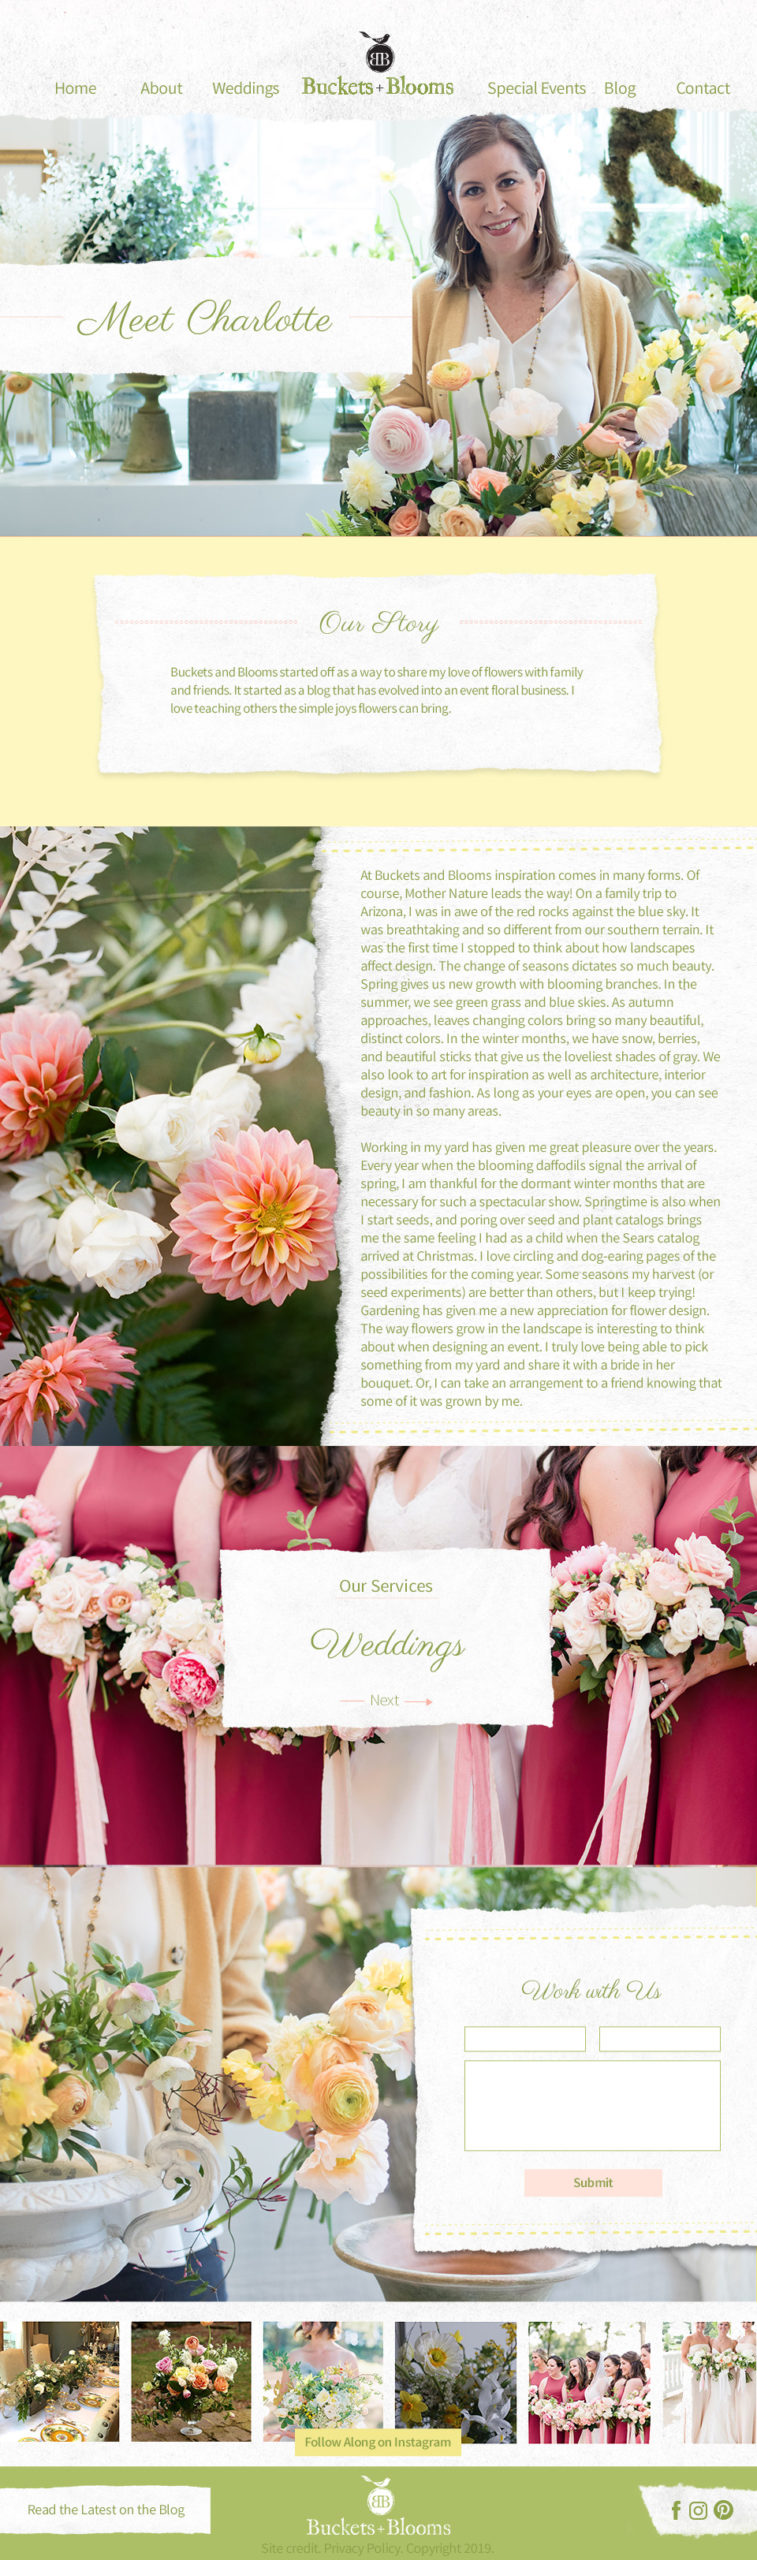 Website design for Buckets and Blooms by J. Alexandria Creative, Huntsville, Alabama branding and website designer. Website About page design. 